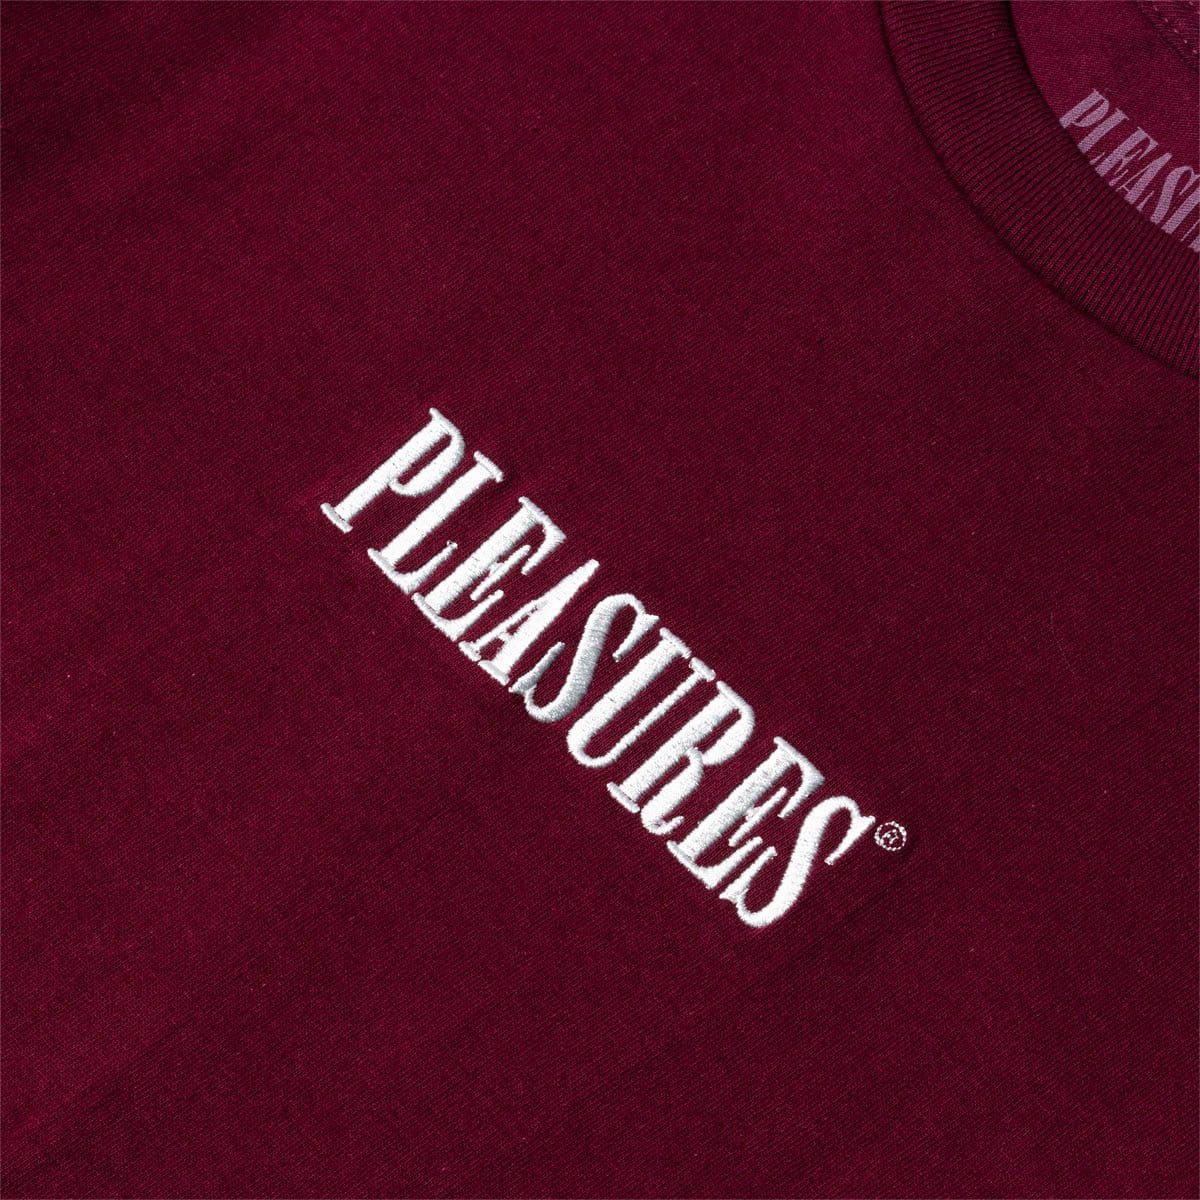 Pleasures T-Shirts CORE EMBROIDERED LONG SLEEVE T-SHIRT